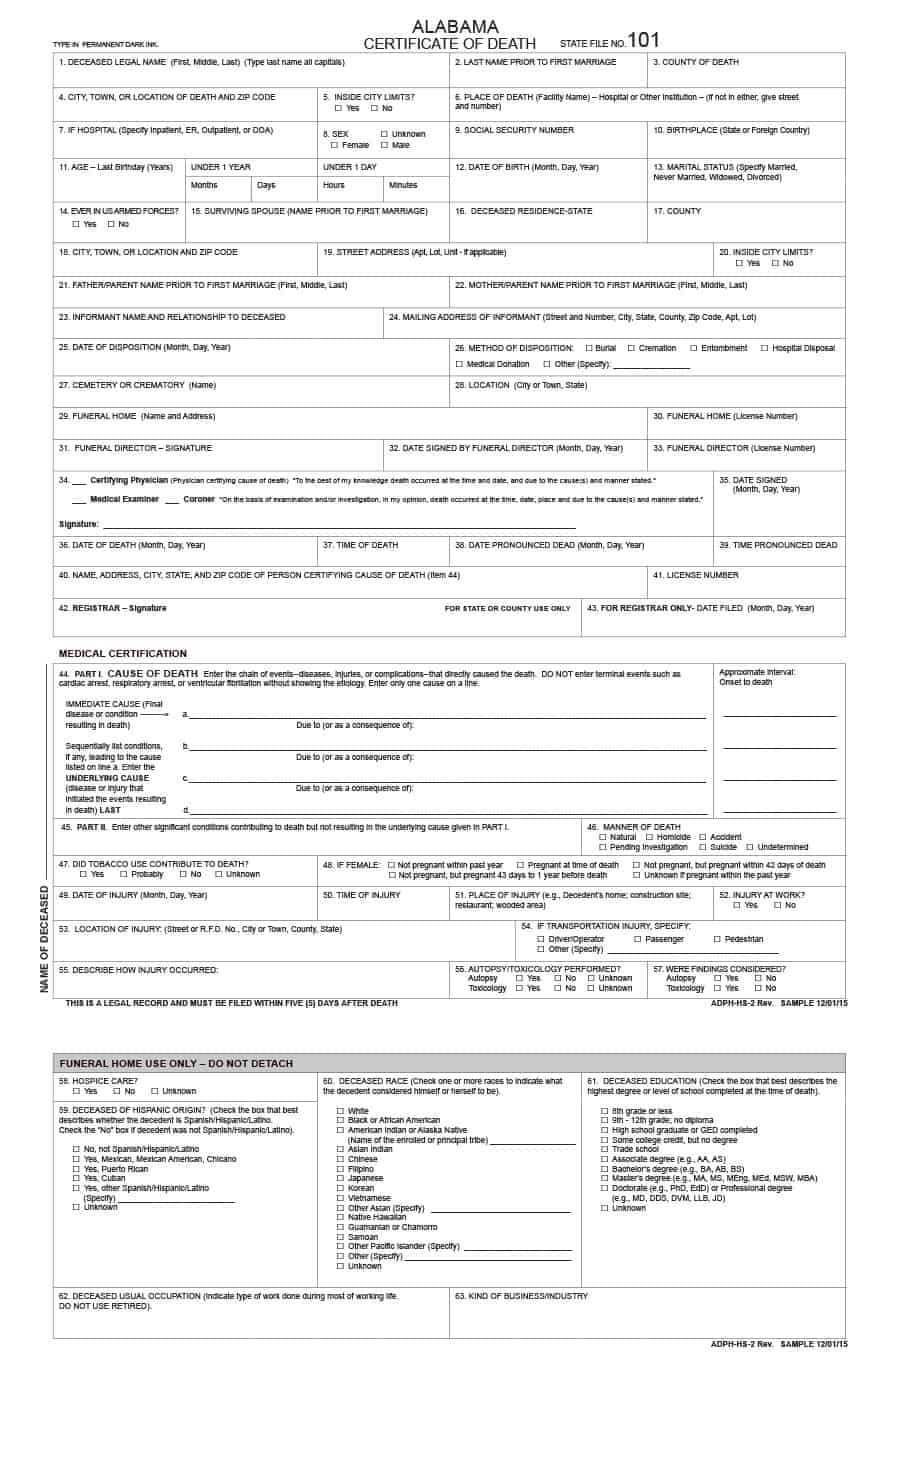 37 Blank Death Certificate Templates [100% Free] ᐅ Template Lab Pertaining To Fake Birth Certificate Template